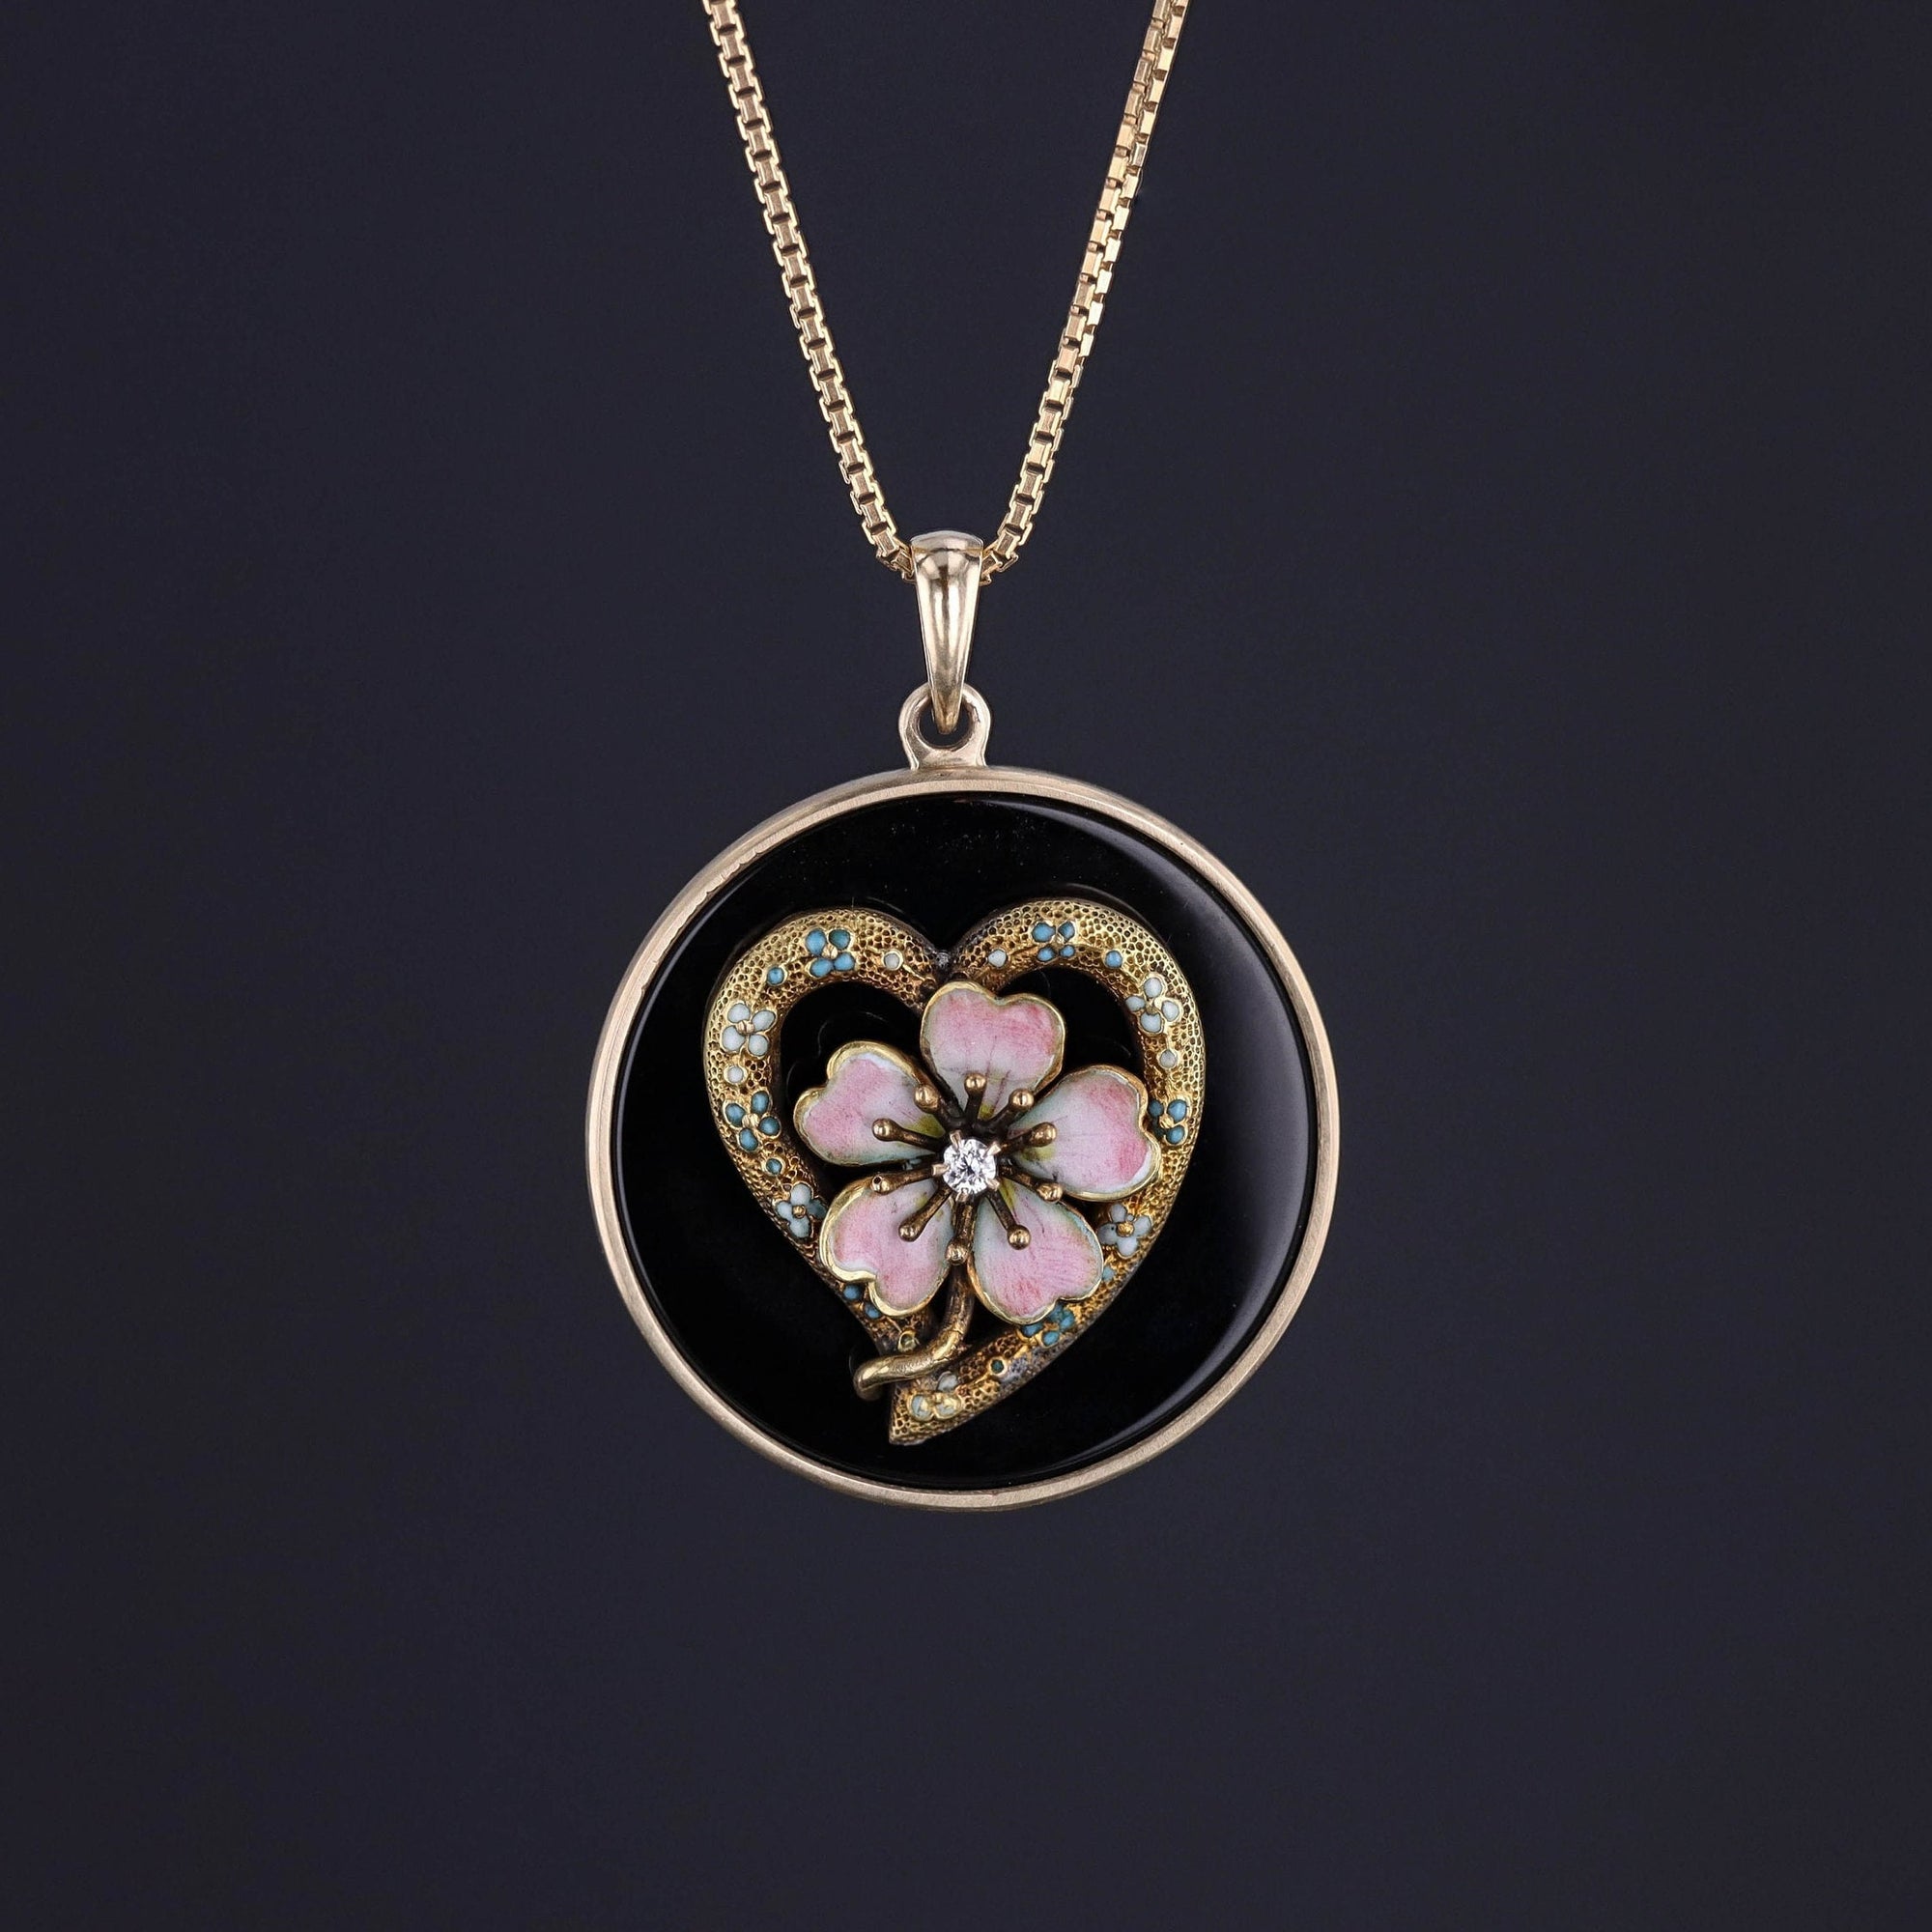 Pink enamel flower with a diamond on a gold heart with blue forget-me-not flowers on a black onyx with a gold chain.